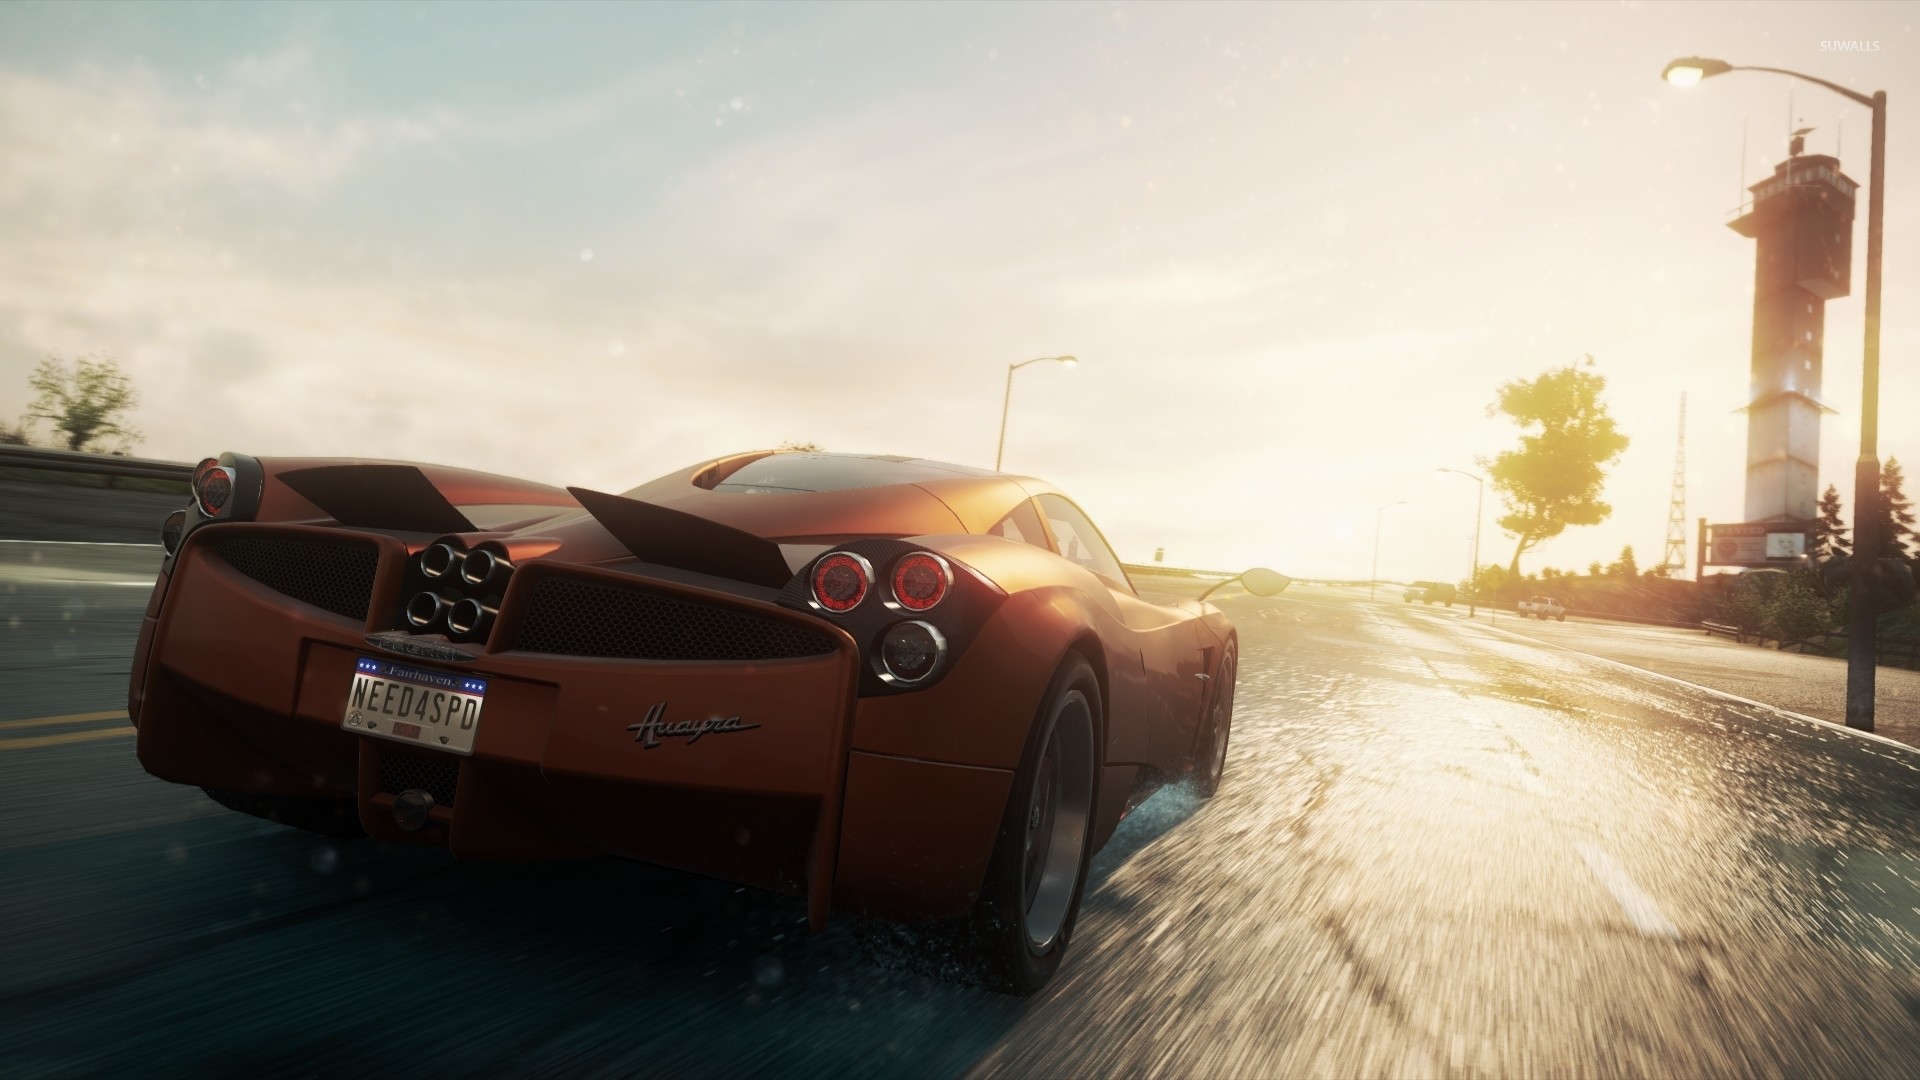 Need for speed wanted game. Need for Speed most wanted 2012. Нфс most wanted 2012. Pagani Huayra most wanted 2012. Нид фор СПИД мост вантед 2012.